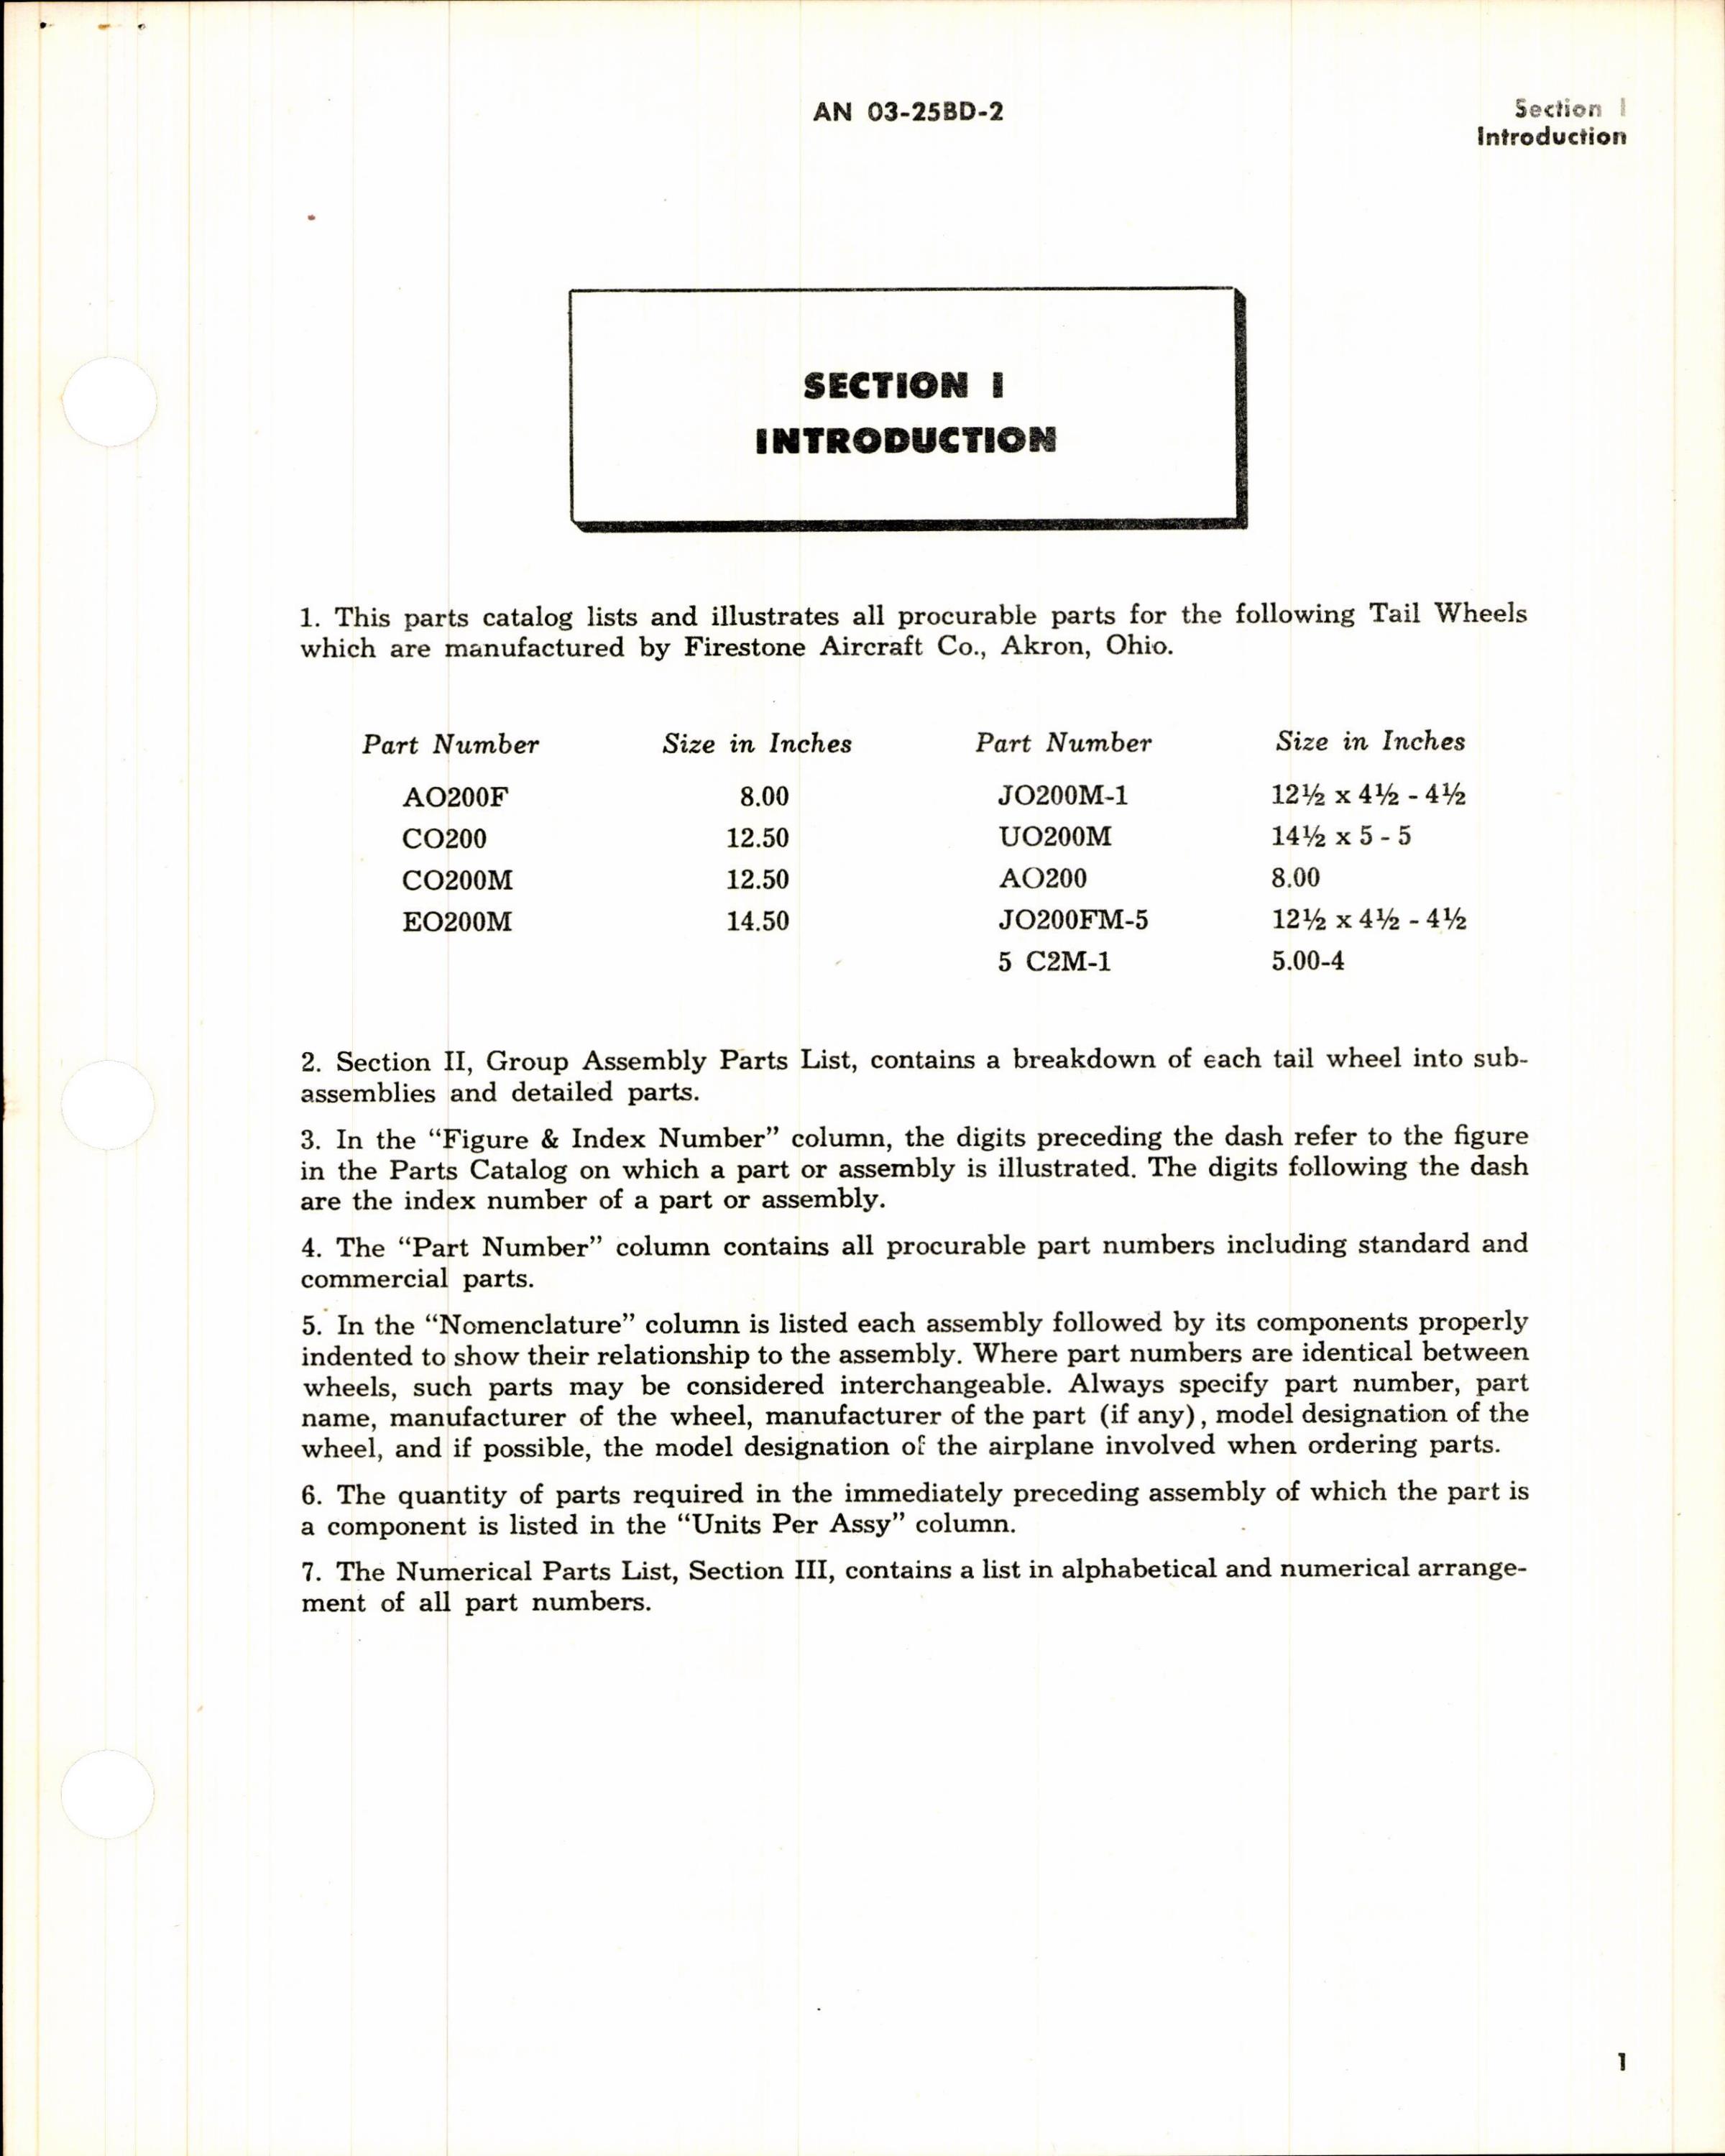 Sample page 3 from AirCorps Library document: Parts Catalog for Firestone Tail Wheels